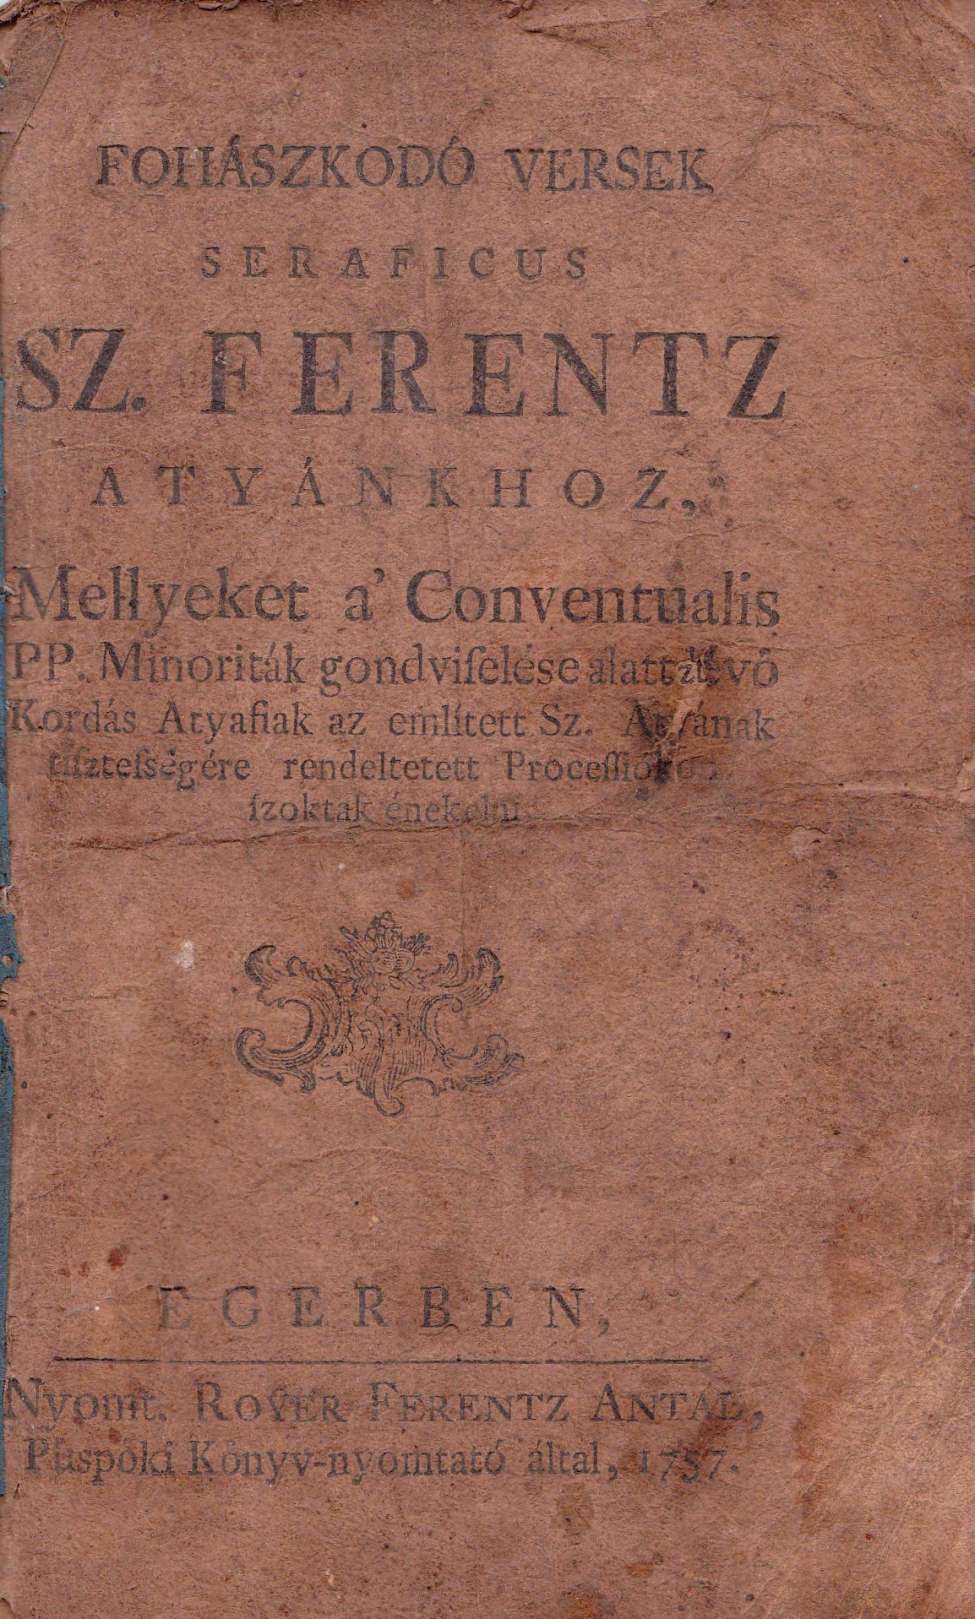 Comic Book Cover For St. Ferentz Atyankhoz